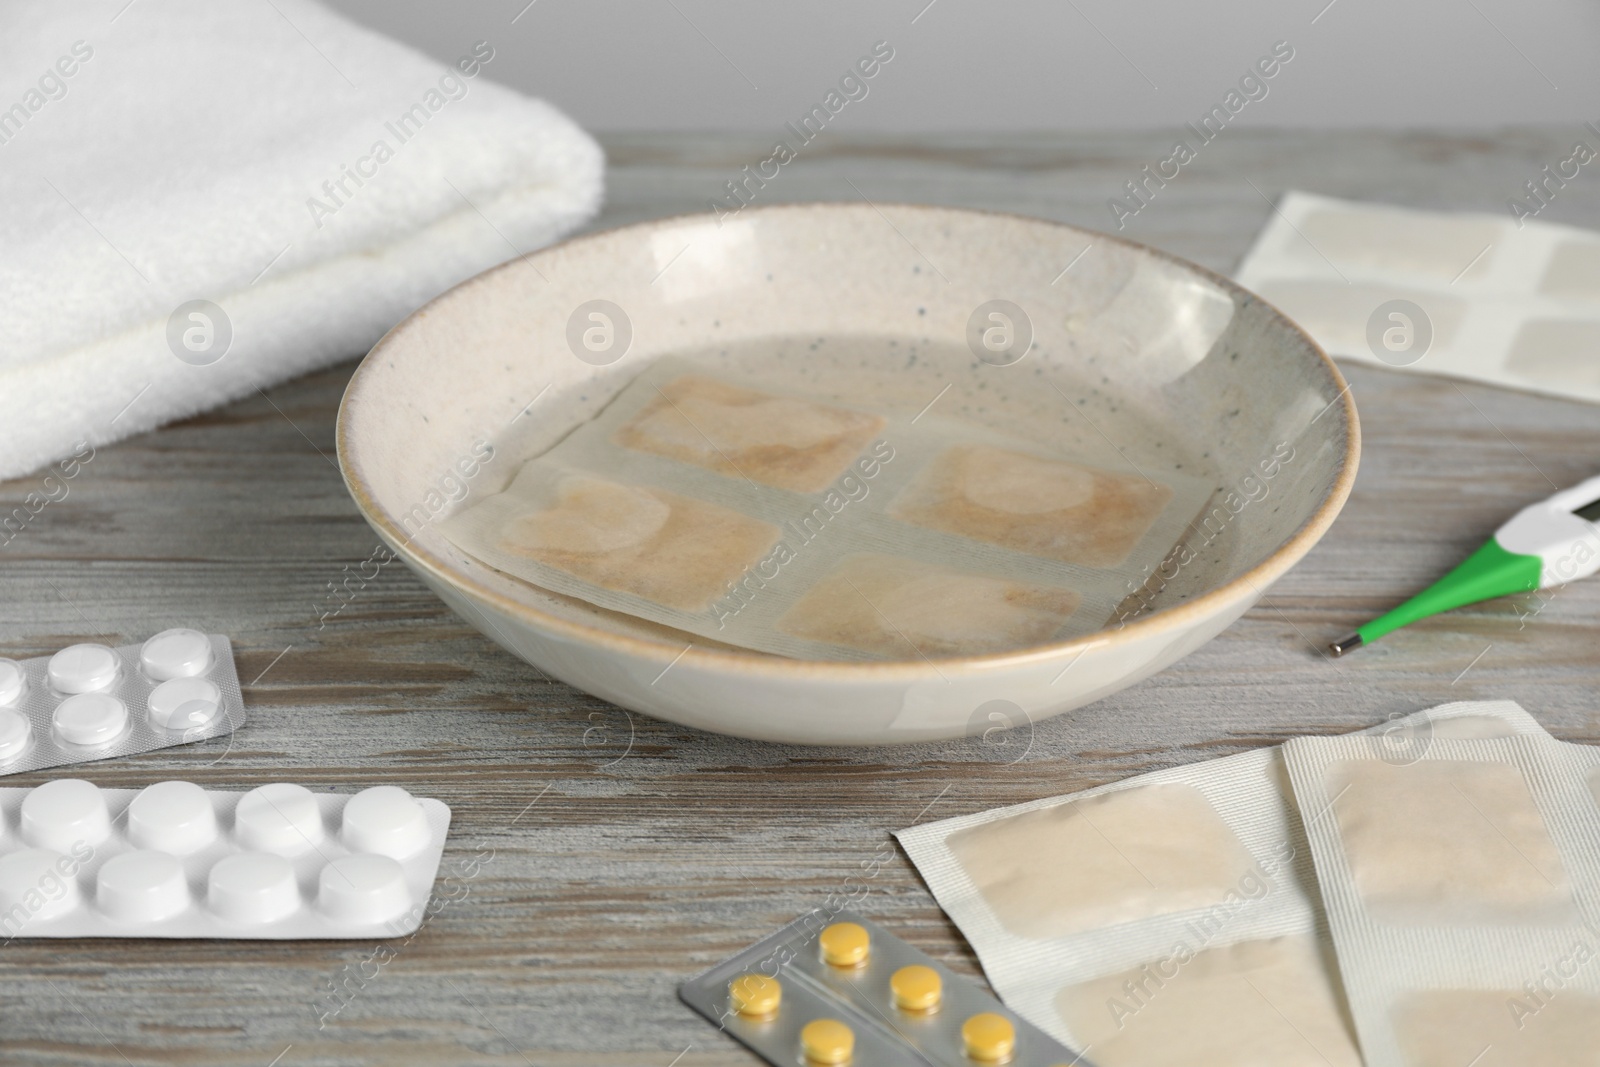 Photo of Mustard plaster in bowl with water on wooden table